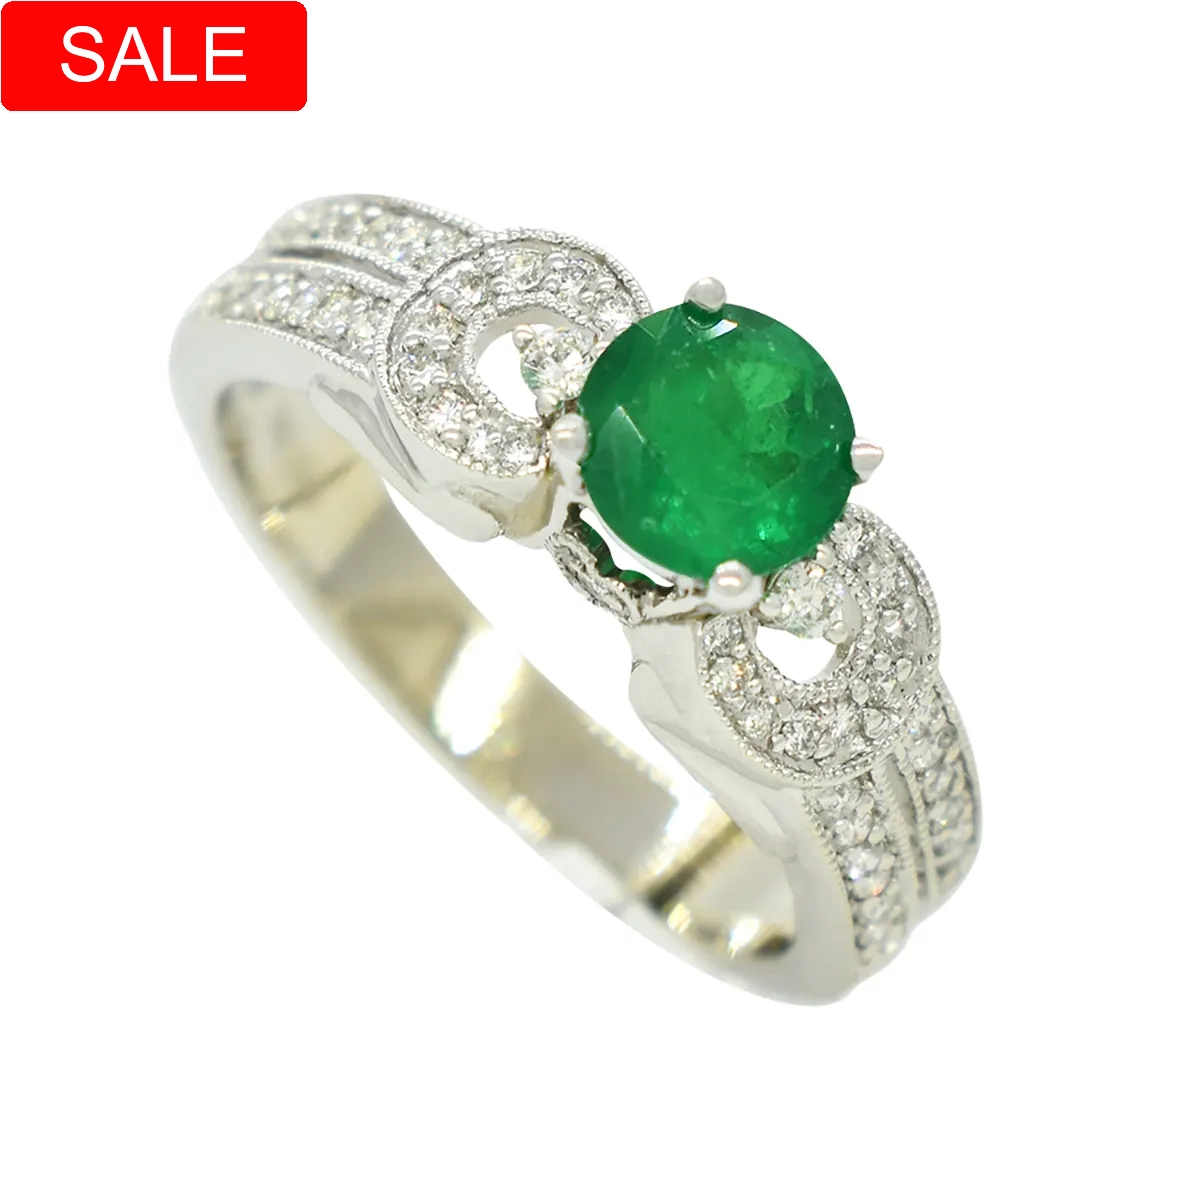 Emerald ring with diamond accents in 14K white gold with 0.67 Ct. natural Colombian emerald and 0.31 Ct. t.w. in 44 round cut small diamonds